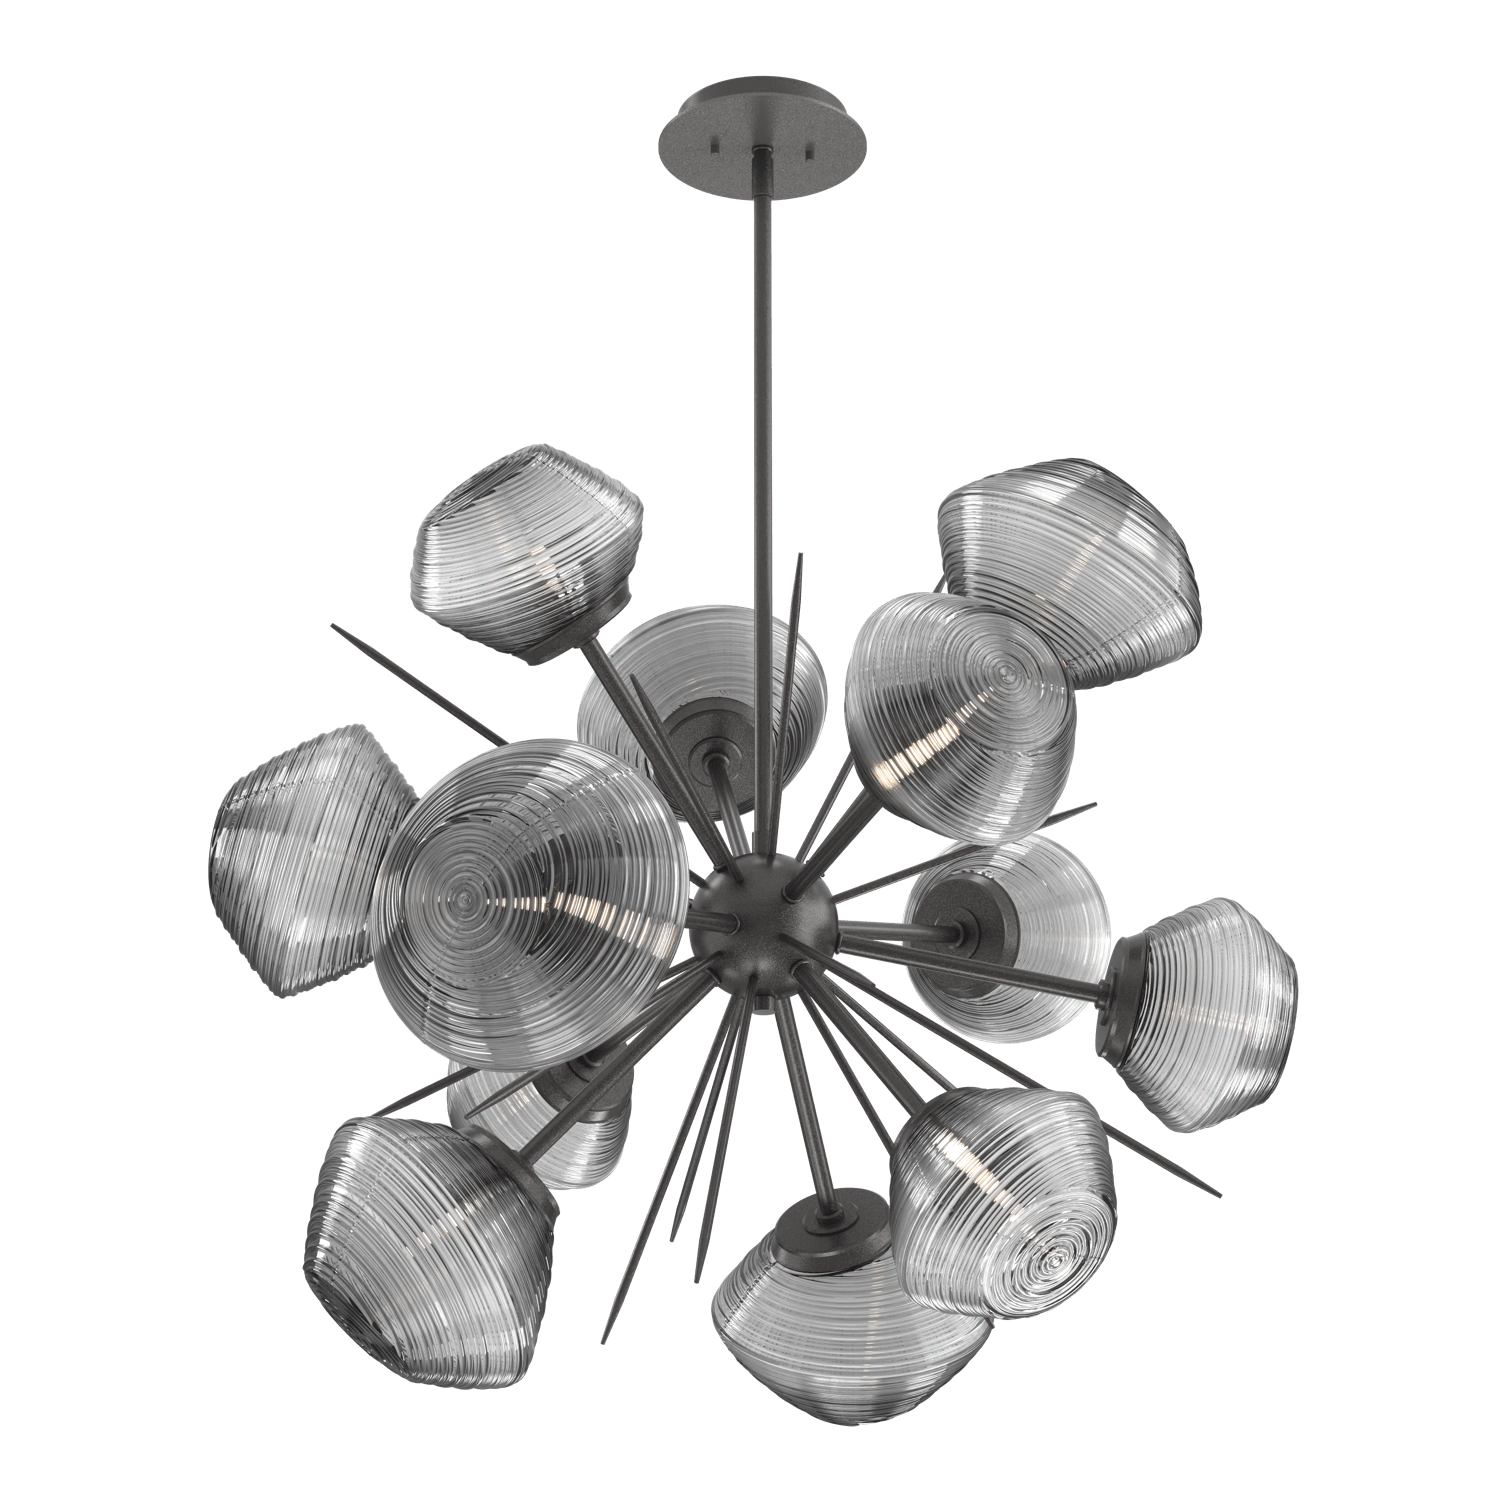 CHB0089-0G-GP-S-Hammerton-Studio-Mesa-36-inch-starburst-chandelier-with-graphite-finish-and-smoke-blown-glass-shades-and-LED-lamping